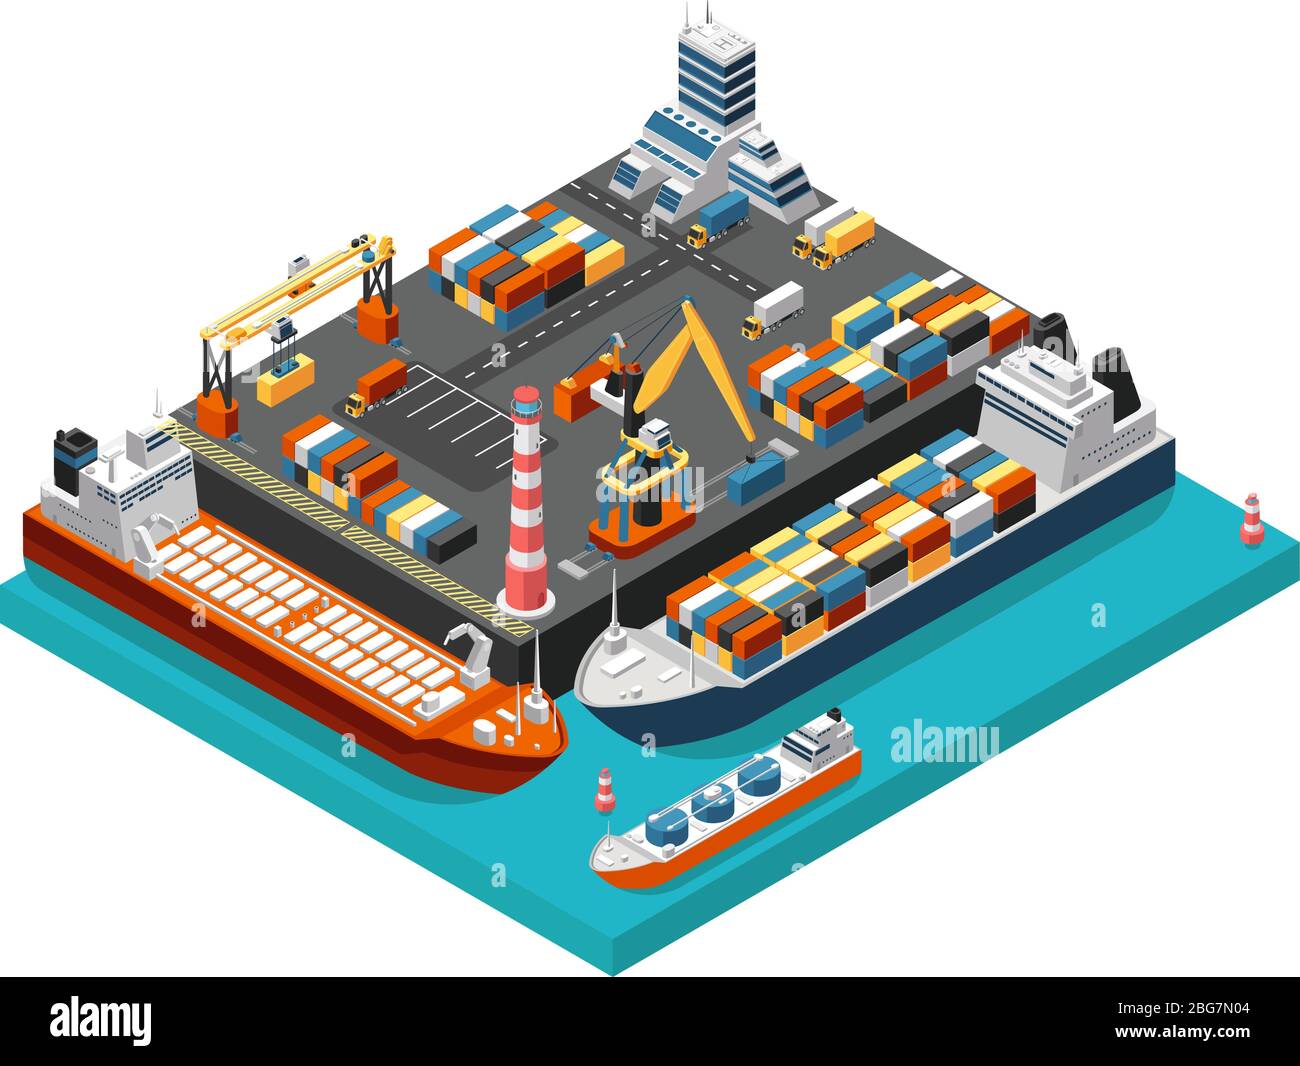 Isometric 3d seaport terminal with cargo ships, cranes and containers in harbor aerial view. Shipping industry vector concept. Transport terminal ship for unloading, export and storage illustration Stock Vector